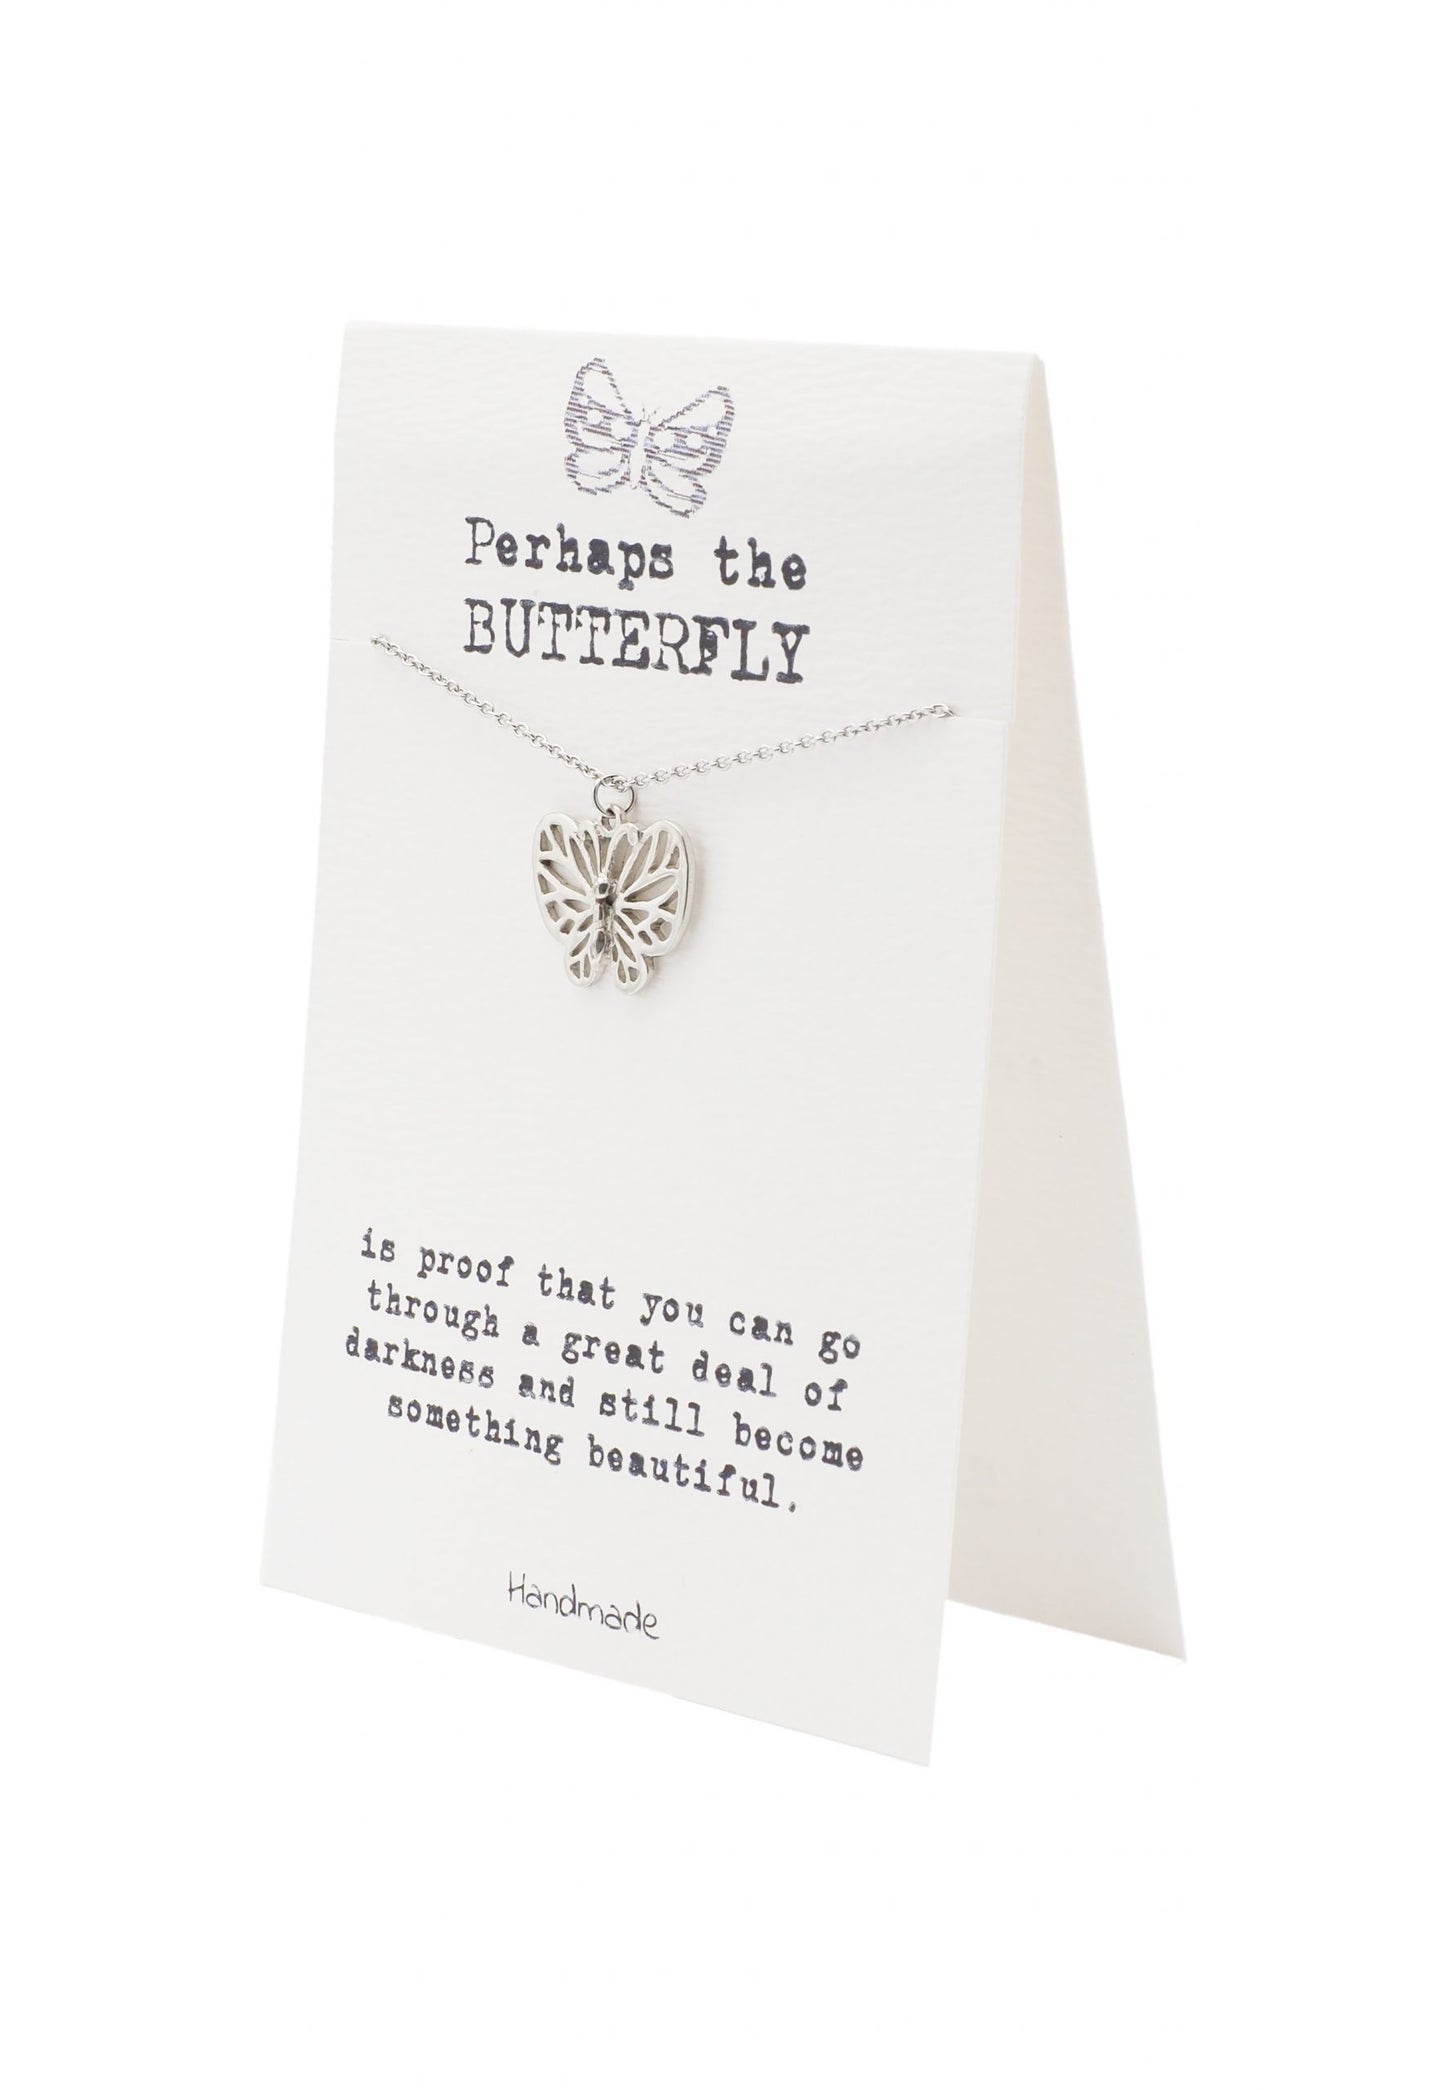 Quinnlyn & Co. Butterfly Pendant Necklace, Handmade Gifts for Women with Inspirational Quote on Greeting Card